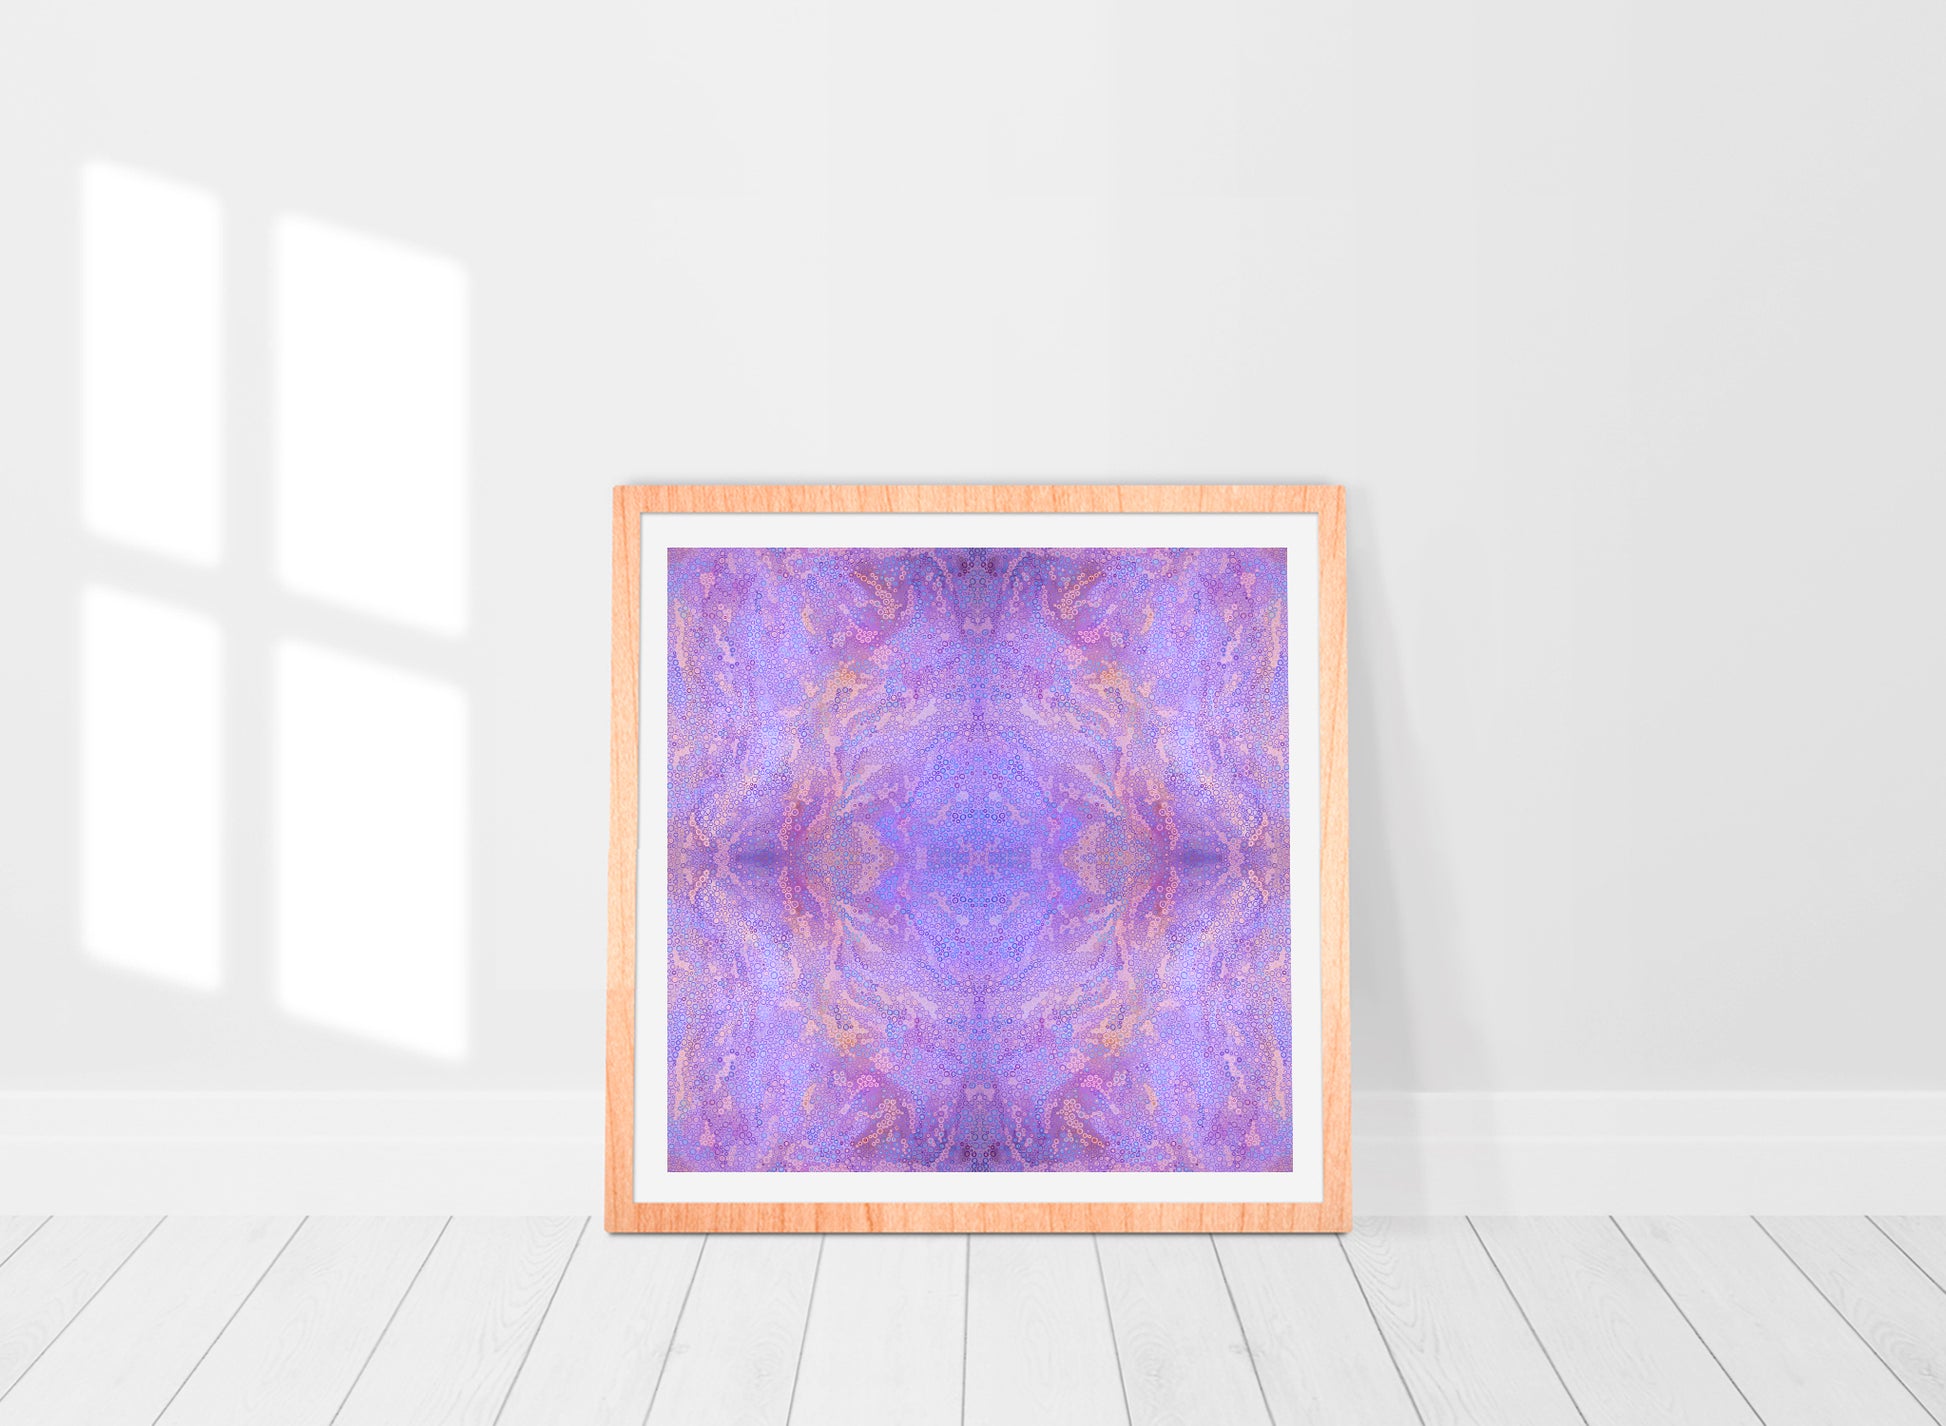 Comprised of hundreds of circles and dots of various sizes this colourful abstract limited edition purple print 